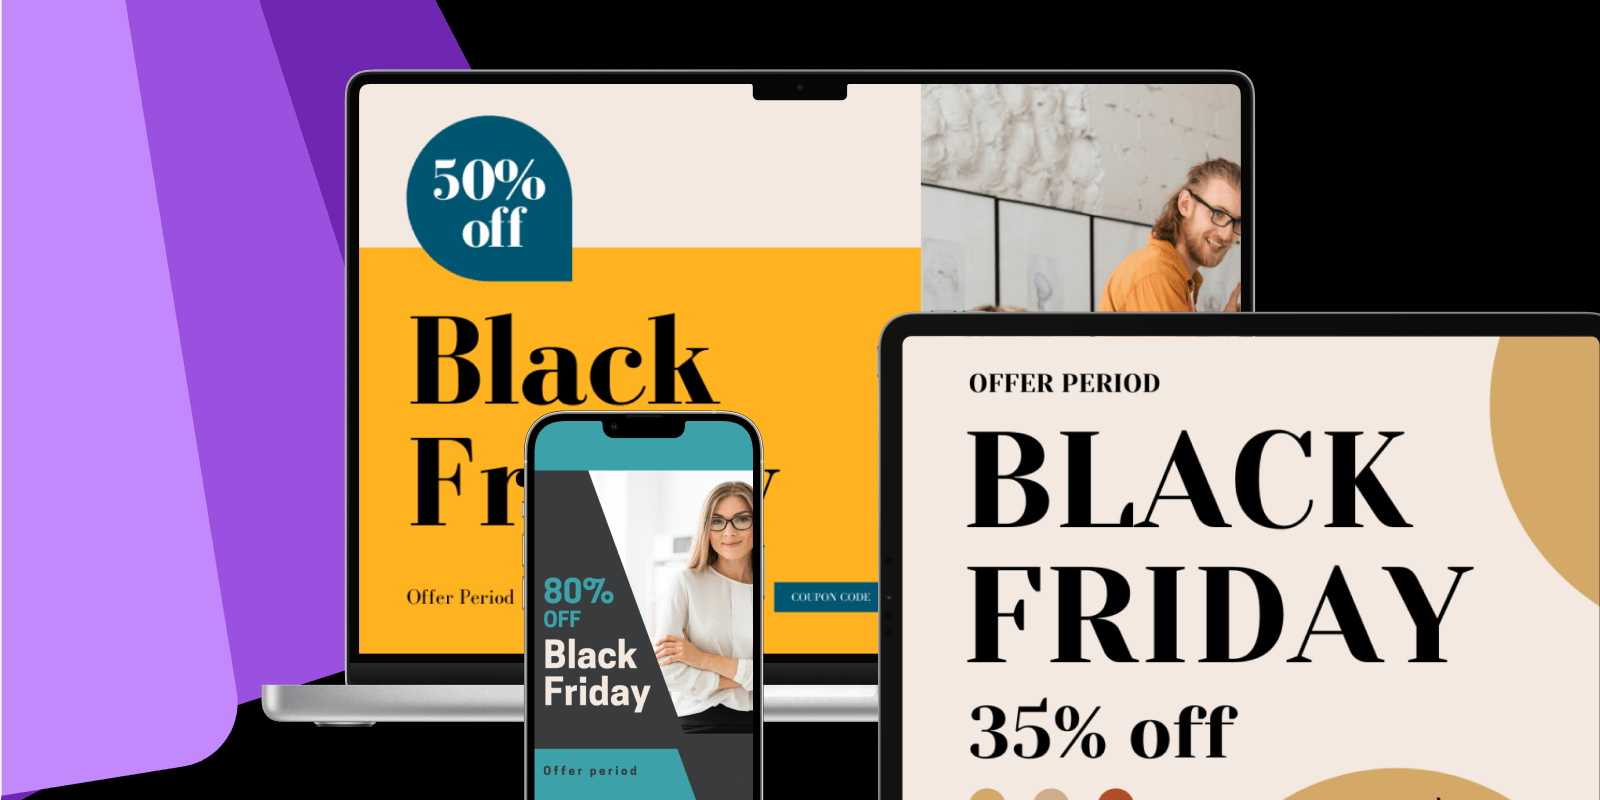 Consumers heading online Black Friday, Cyber Monday